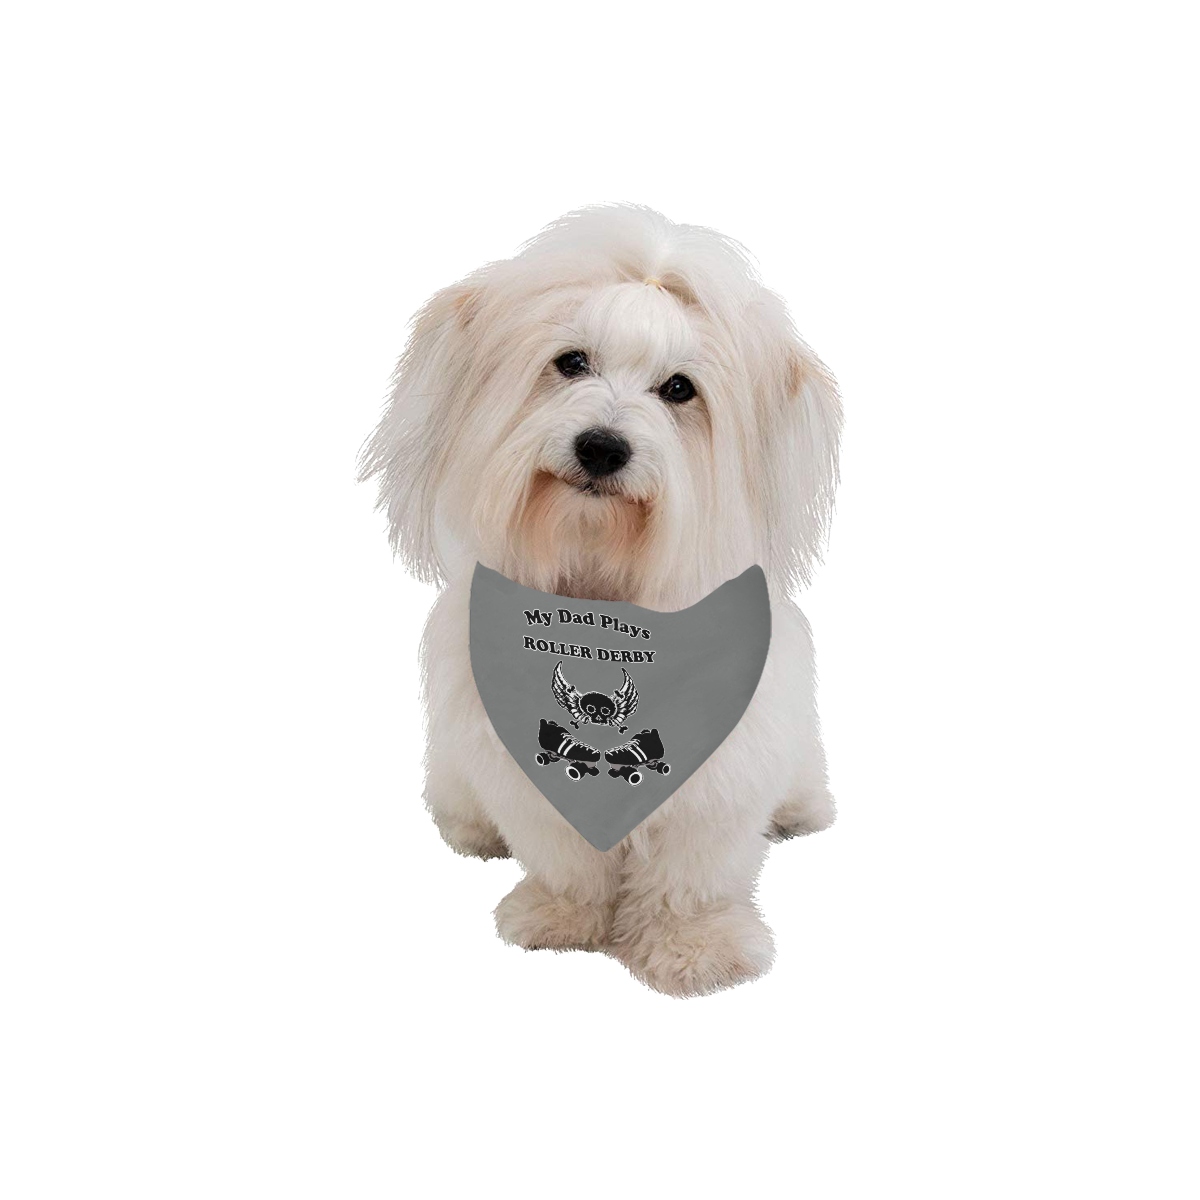 My Dad Plays Roller Derby Pet Dog Bandana/Large Size